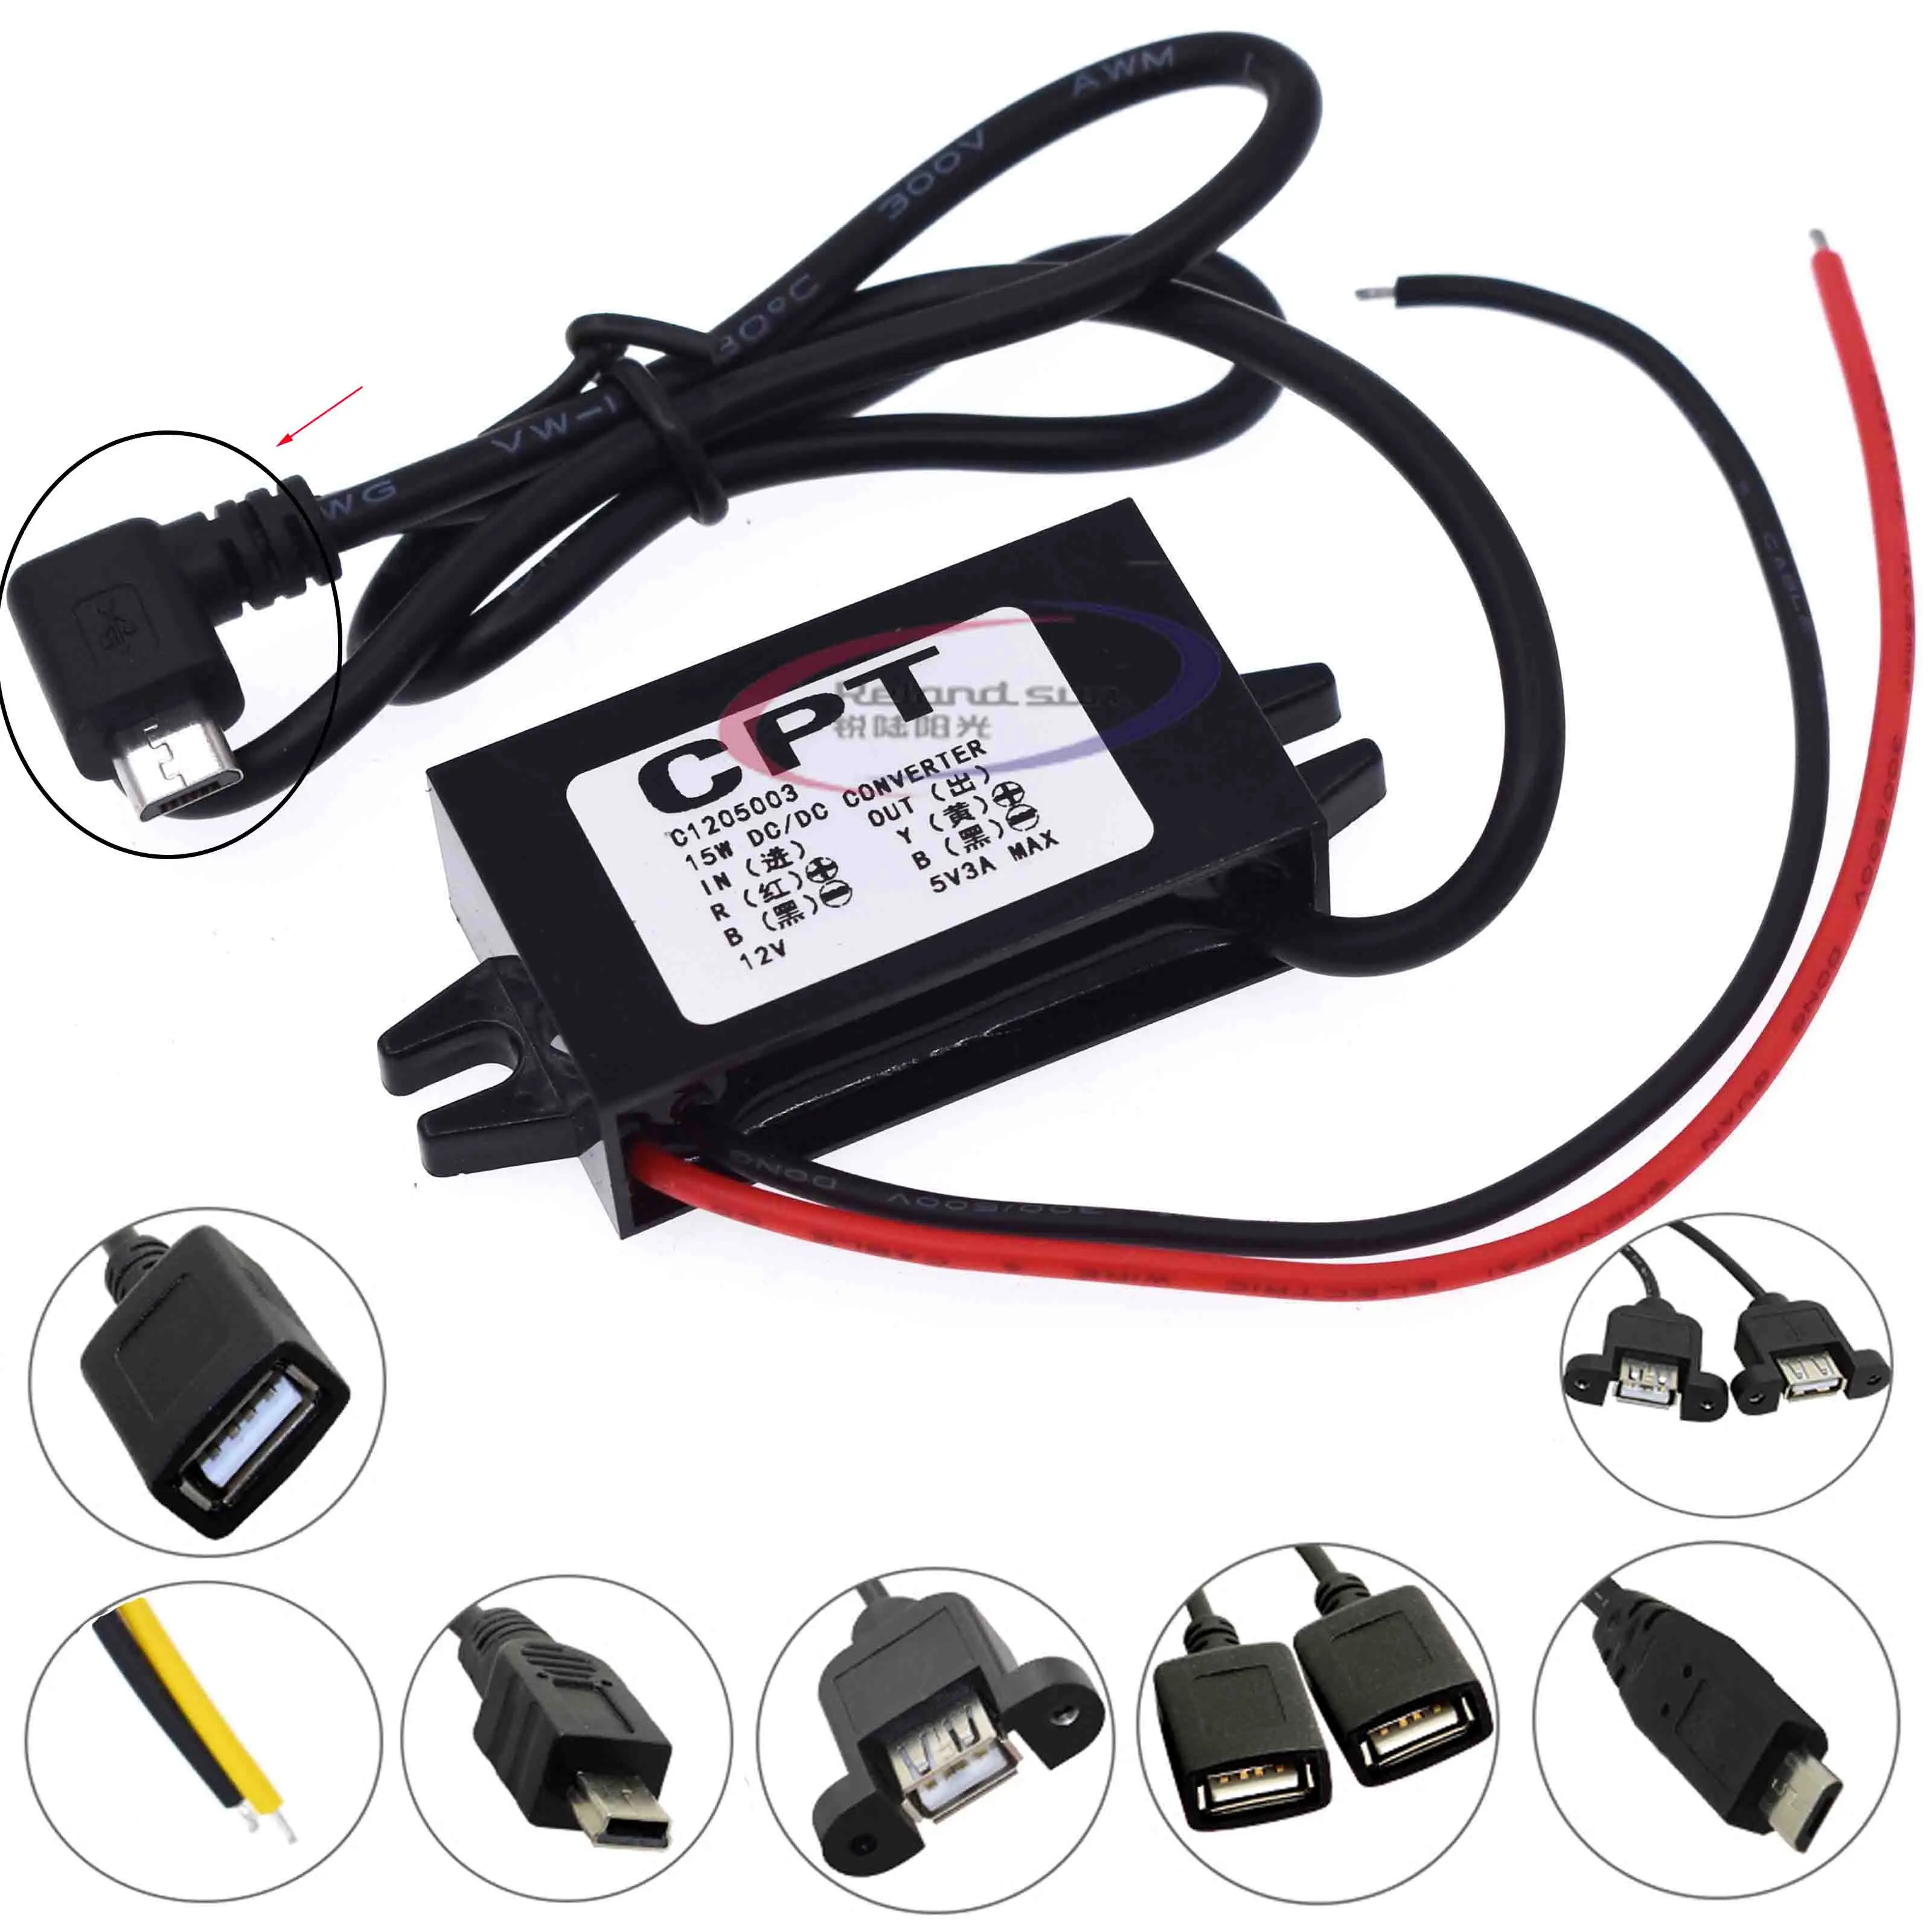 DC-DC 12V to 5V 3A 15W Car Power Converter Micro Mini USB Step Down Voltage Power Supply Output Adapter Low Heat Auto Protection